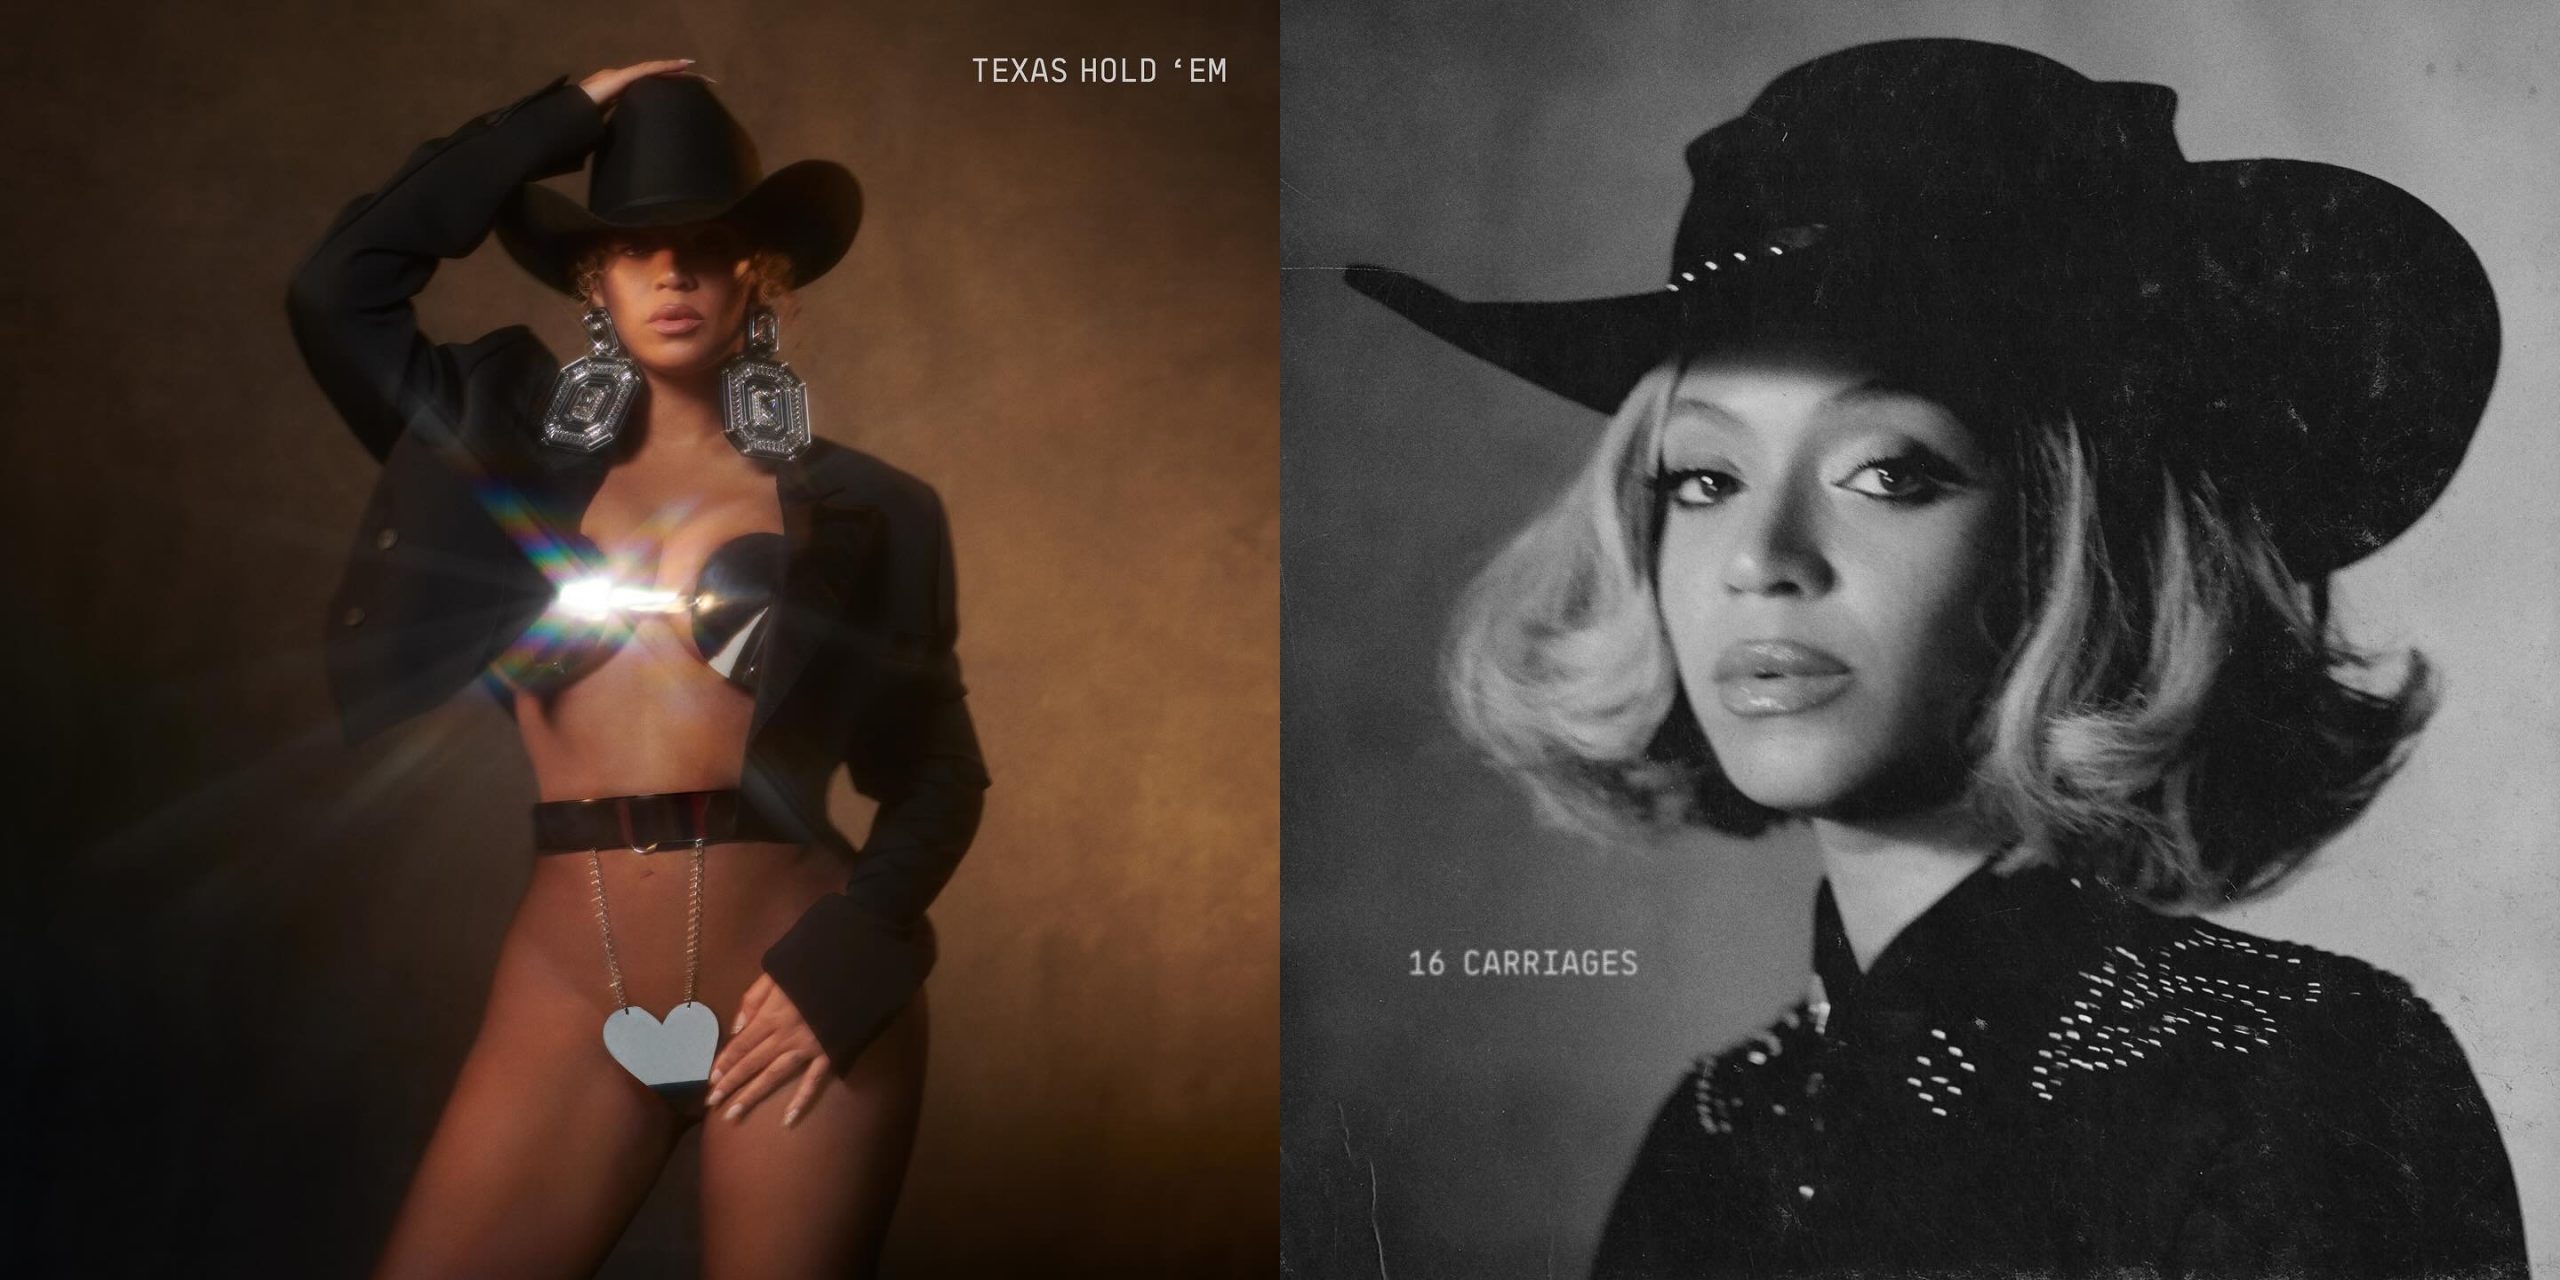 Production Credits For Beyoncé’s New Singles ‘TEXAS HOLD ‘EM’ & ’16 CARRIAGES’ miixtapechiick